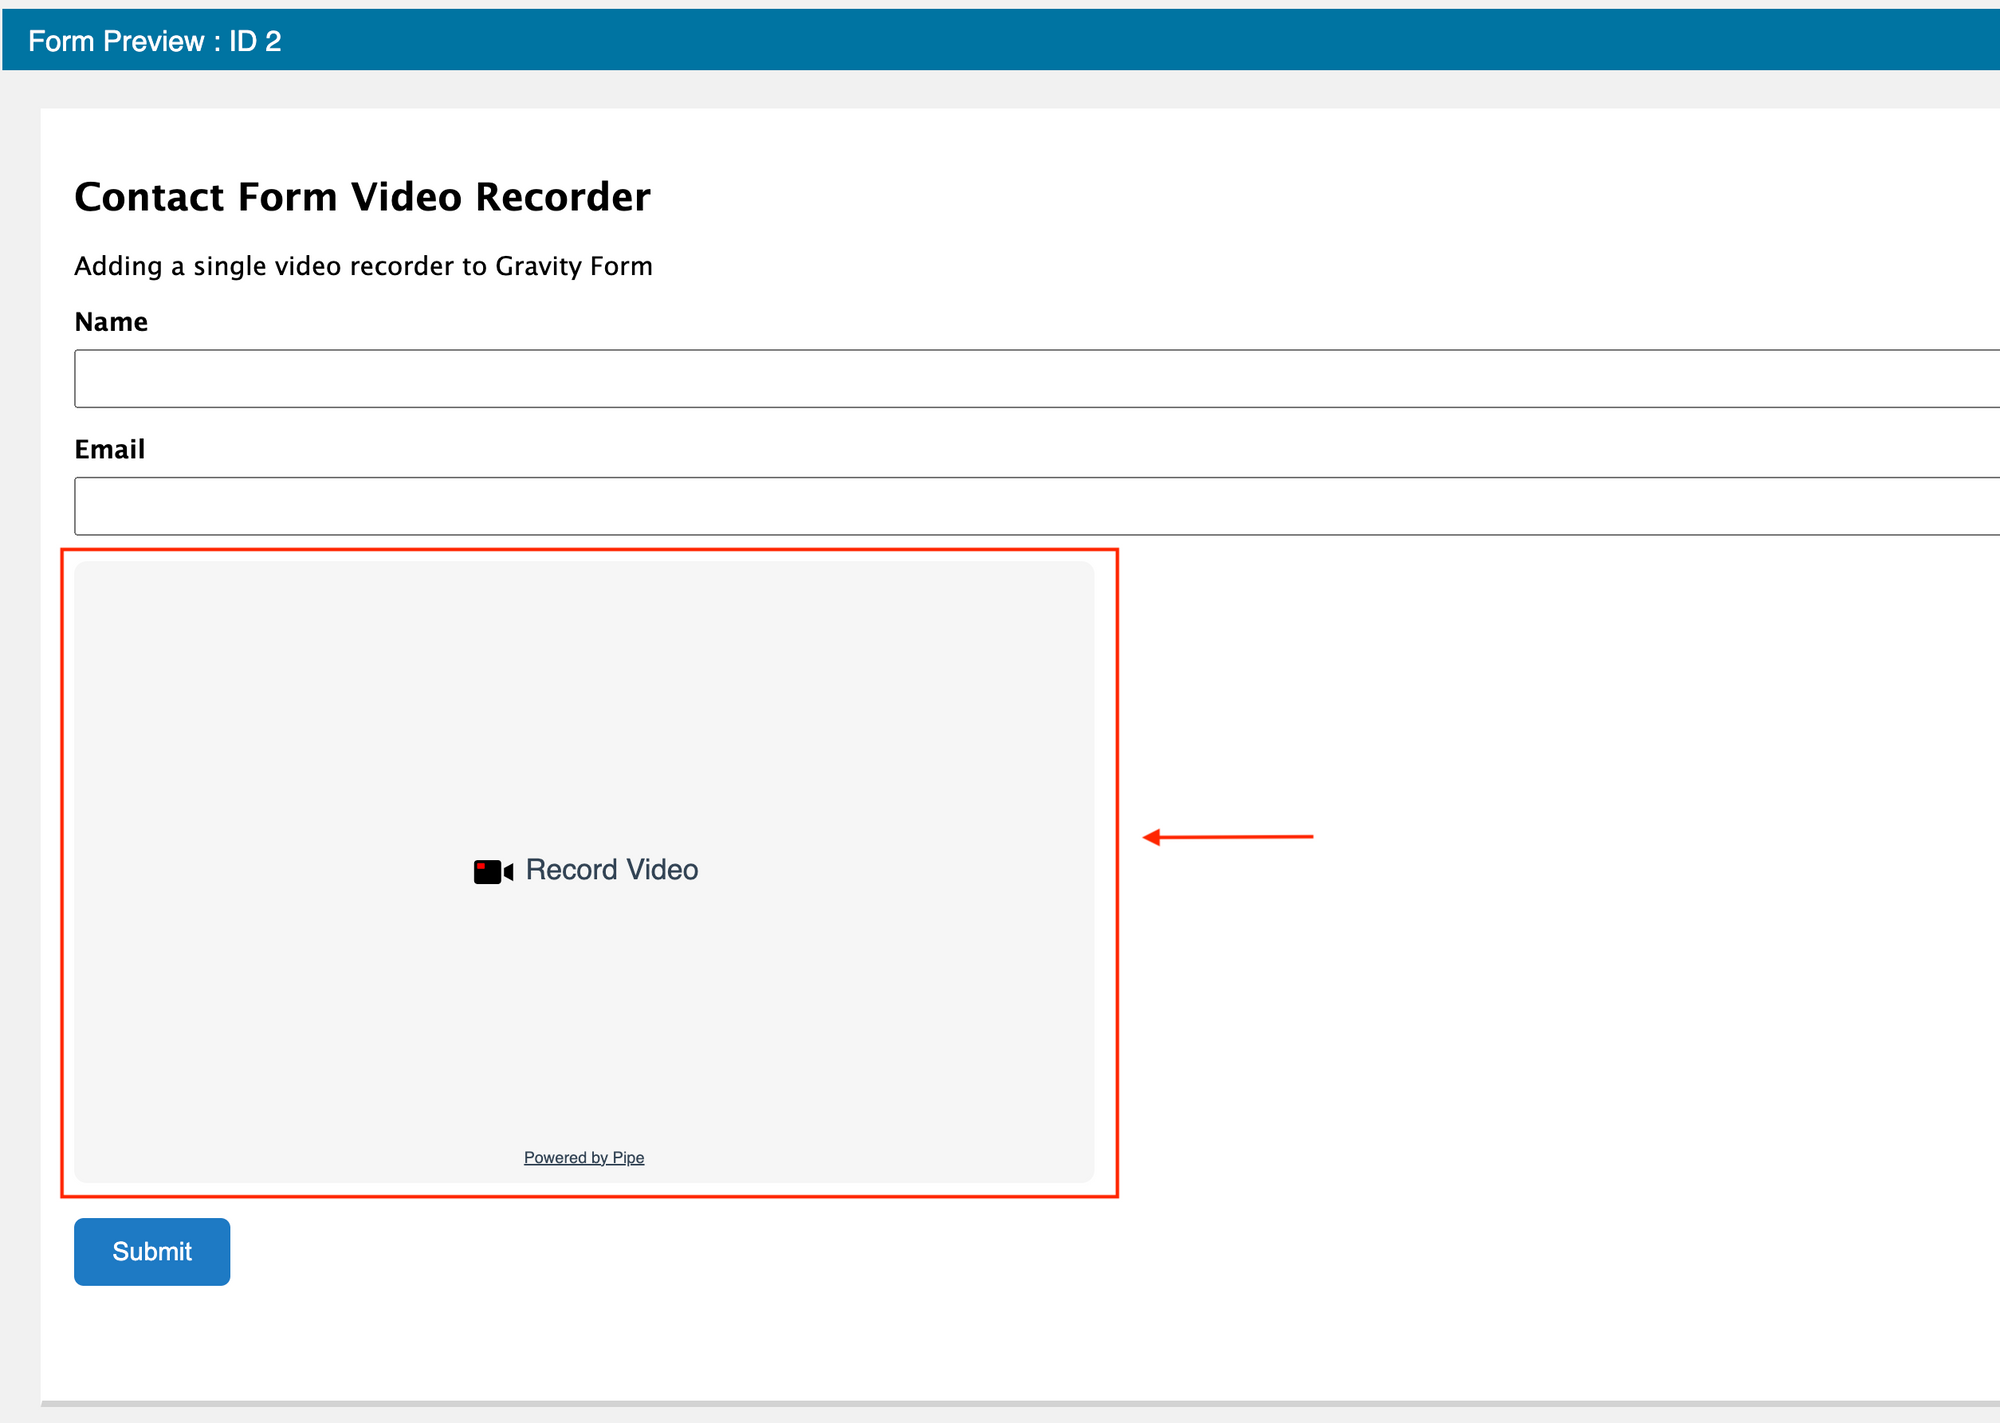 How To Add One or More Video Recorders to Gravity Forms Using the 2.0 Embed Code